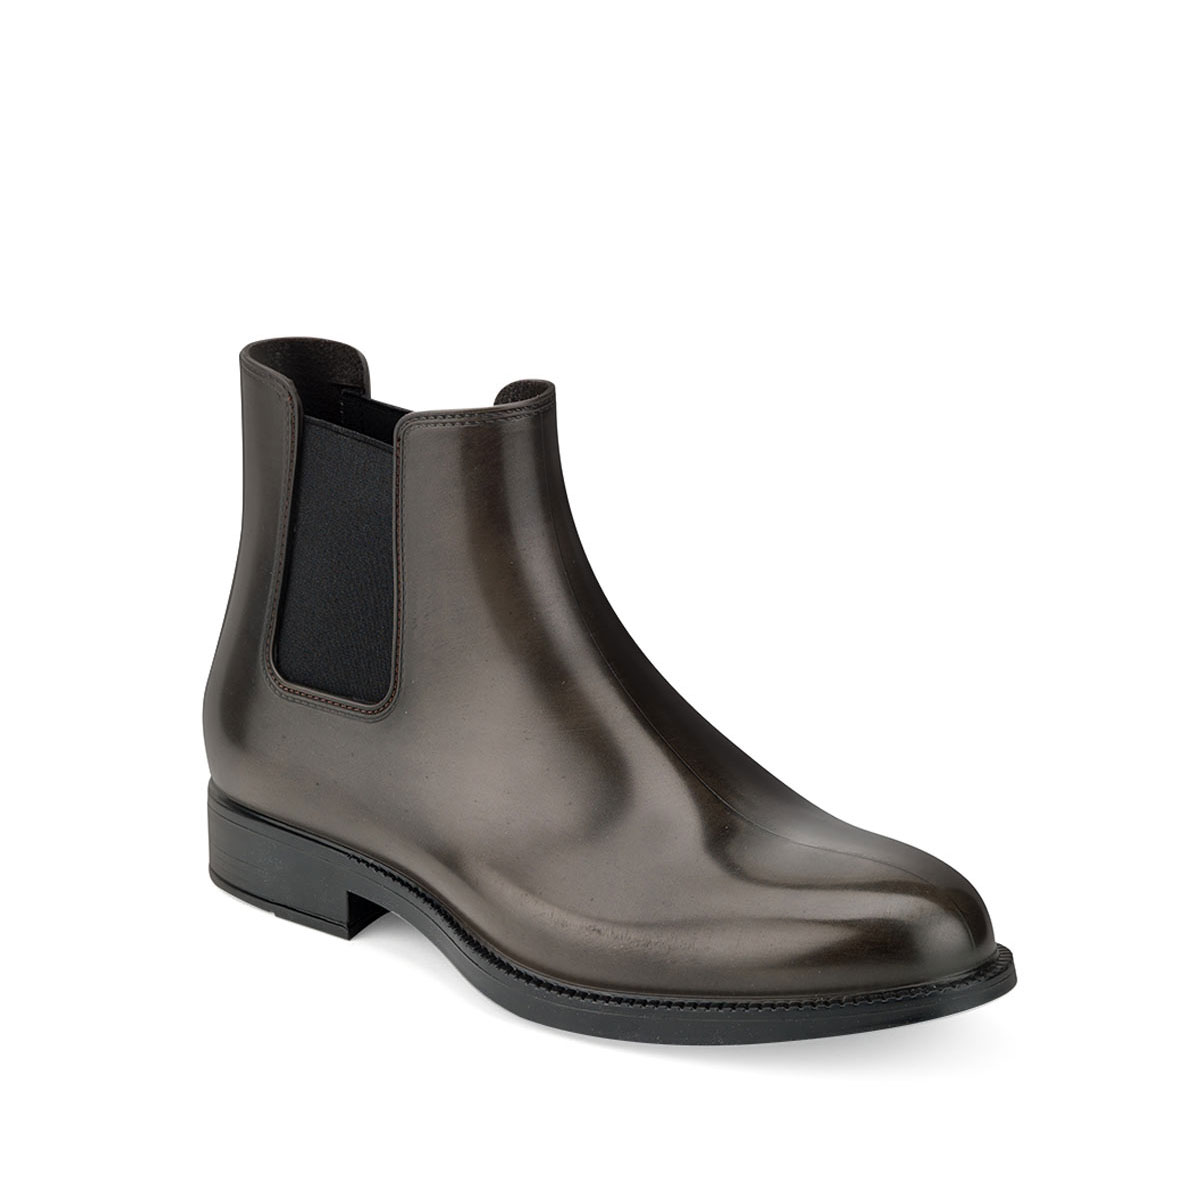 Chelsea boot in brushed effect pvc with elastic band on ankle sides and insole - brown colour